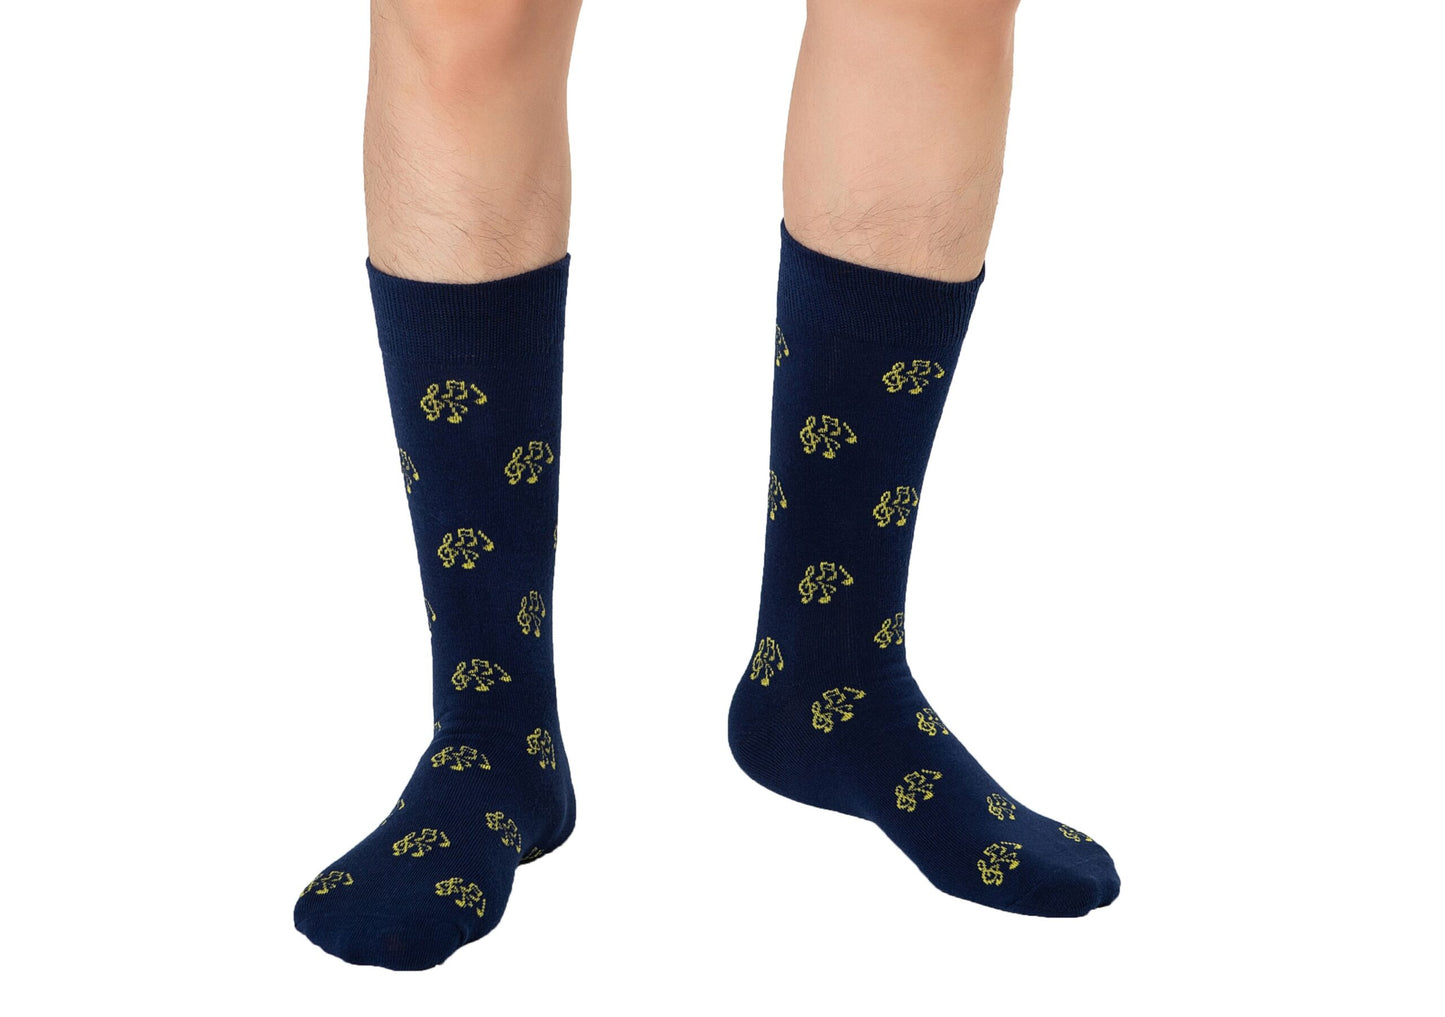 A person standing with Musical Note Socks adorned with a yellow pattern harmonizes against a white background.